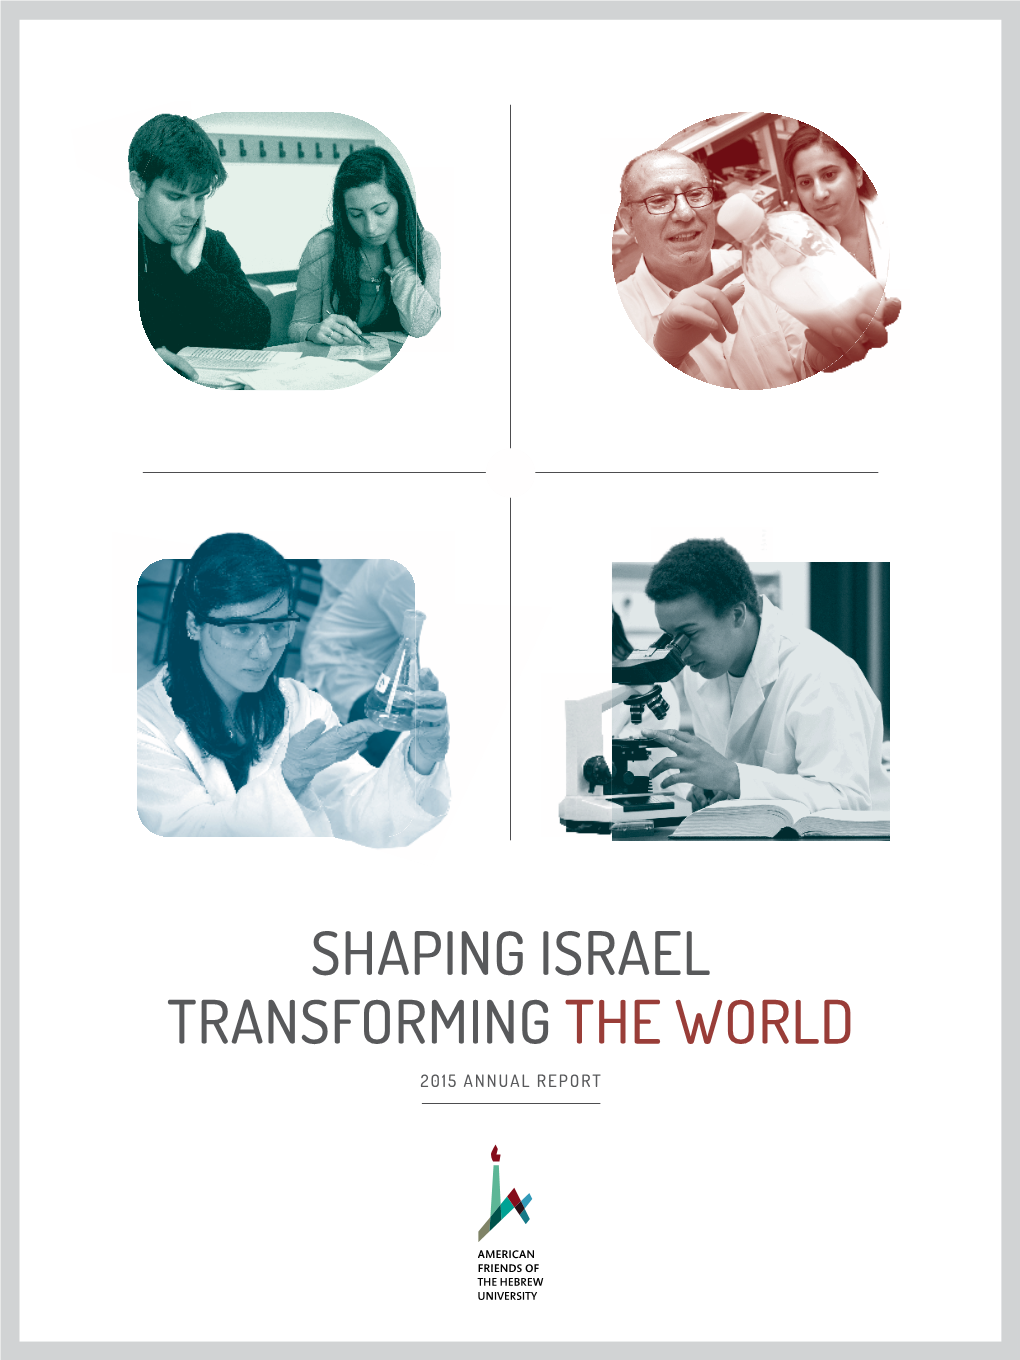 Shaping Israel Transforming the World 2015 Annual Report by Bringing Together Many of the Brightest Minds in Israel